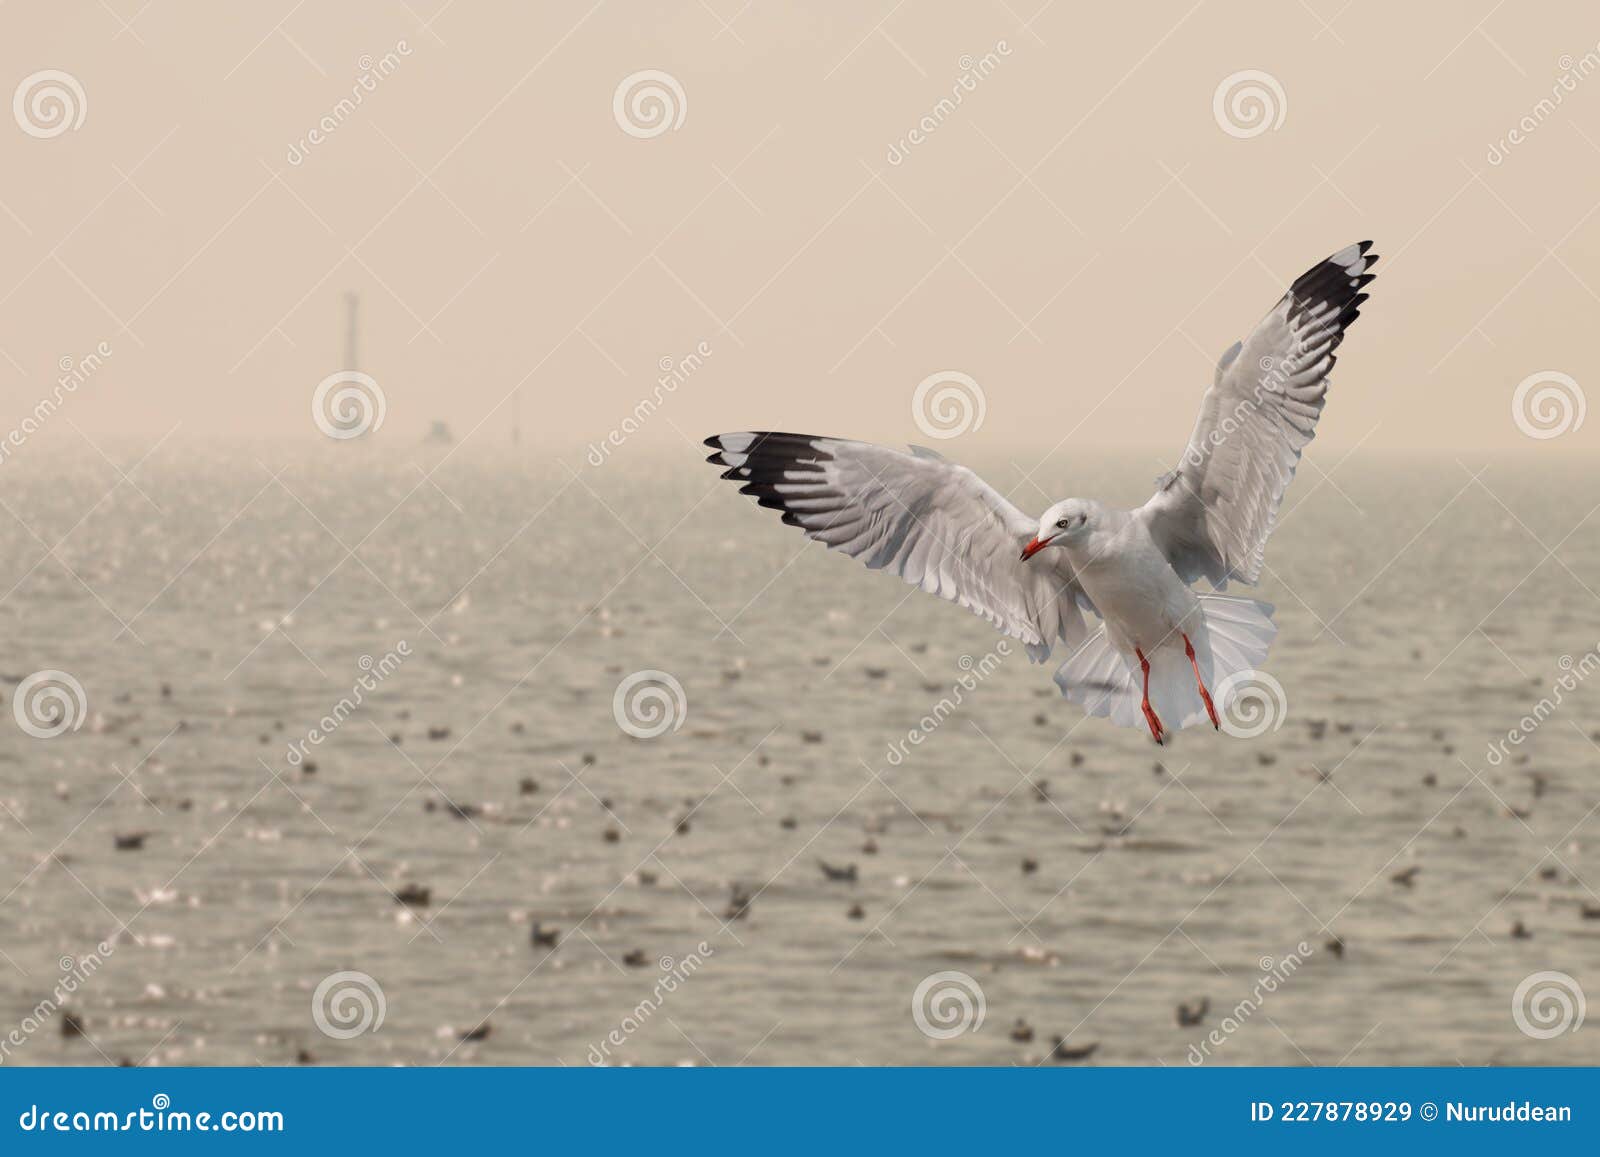 seagulls flying over the sea in everning time